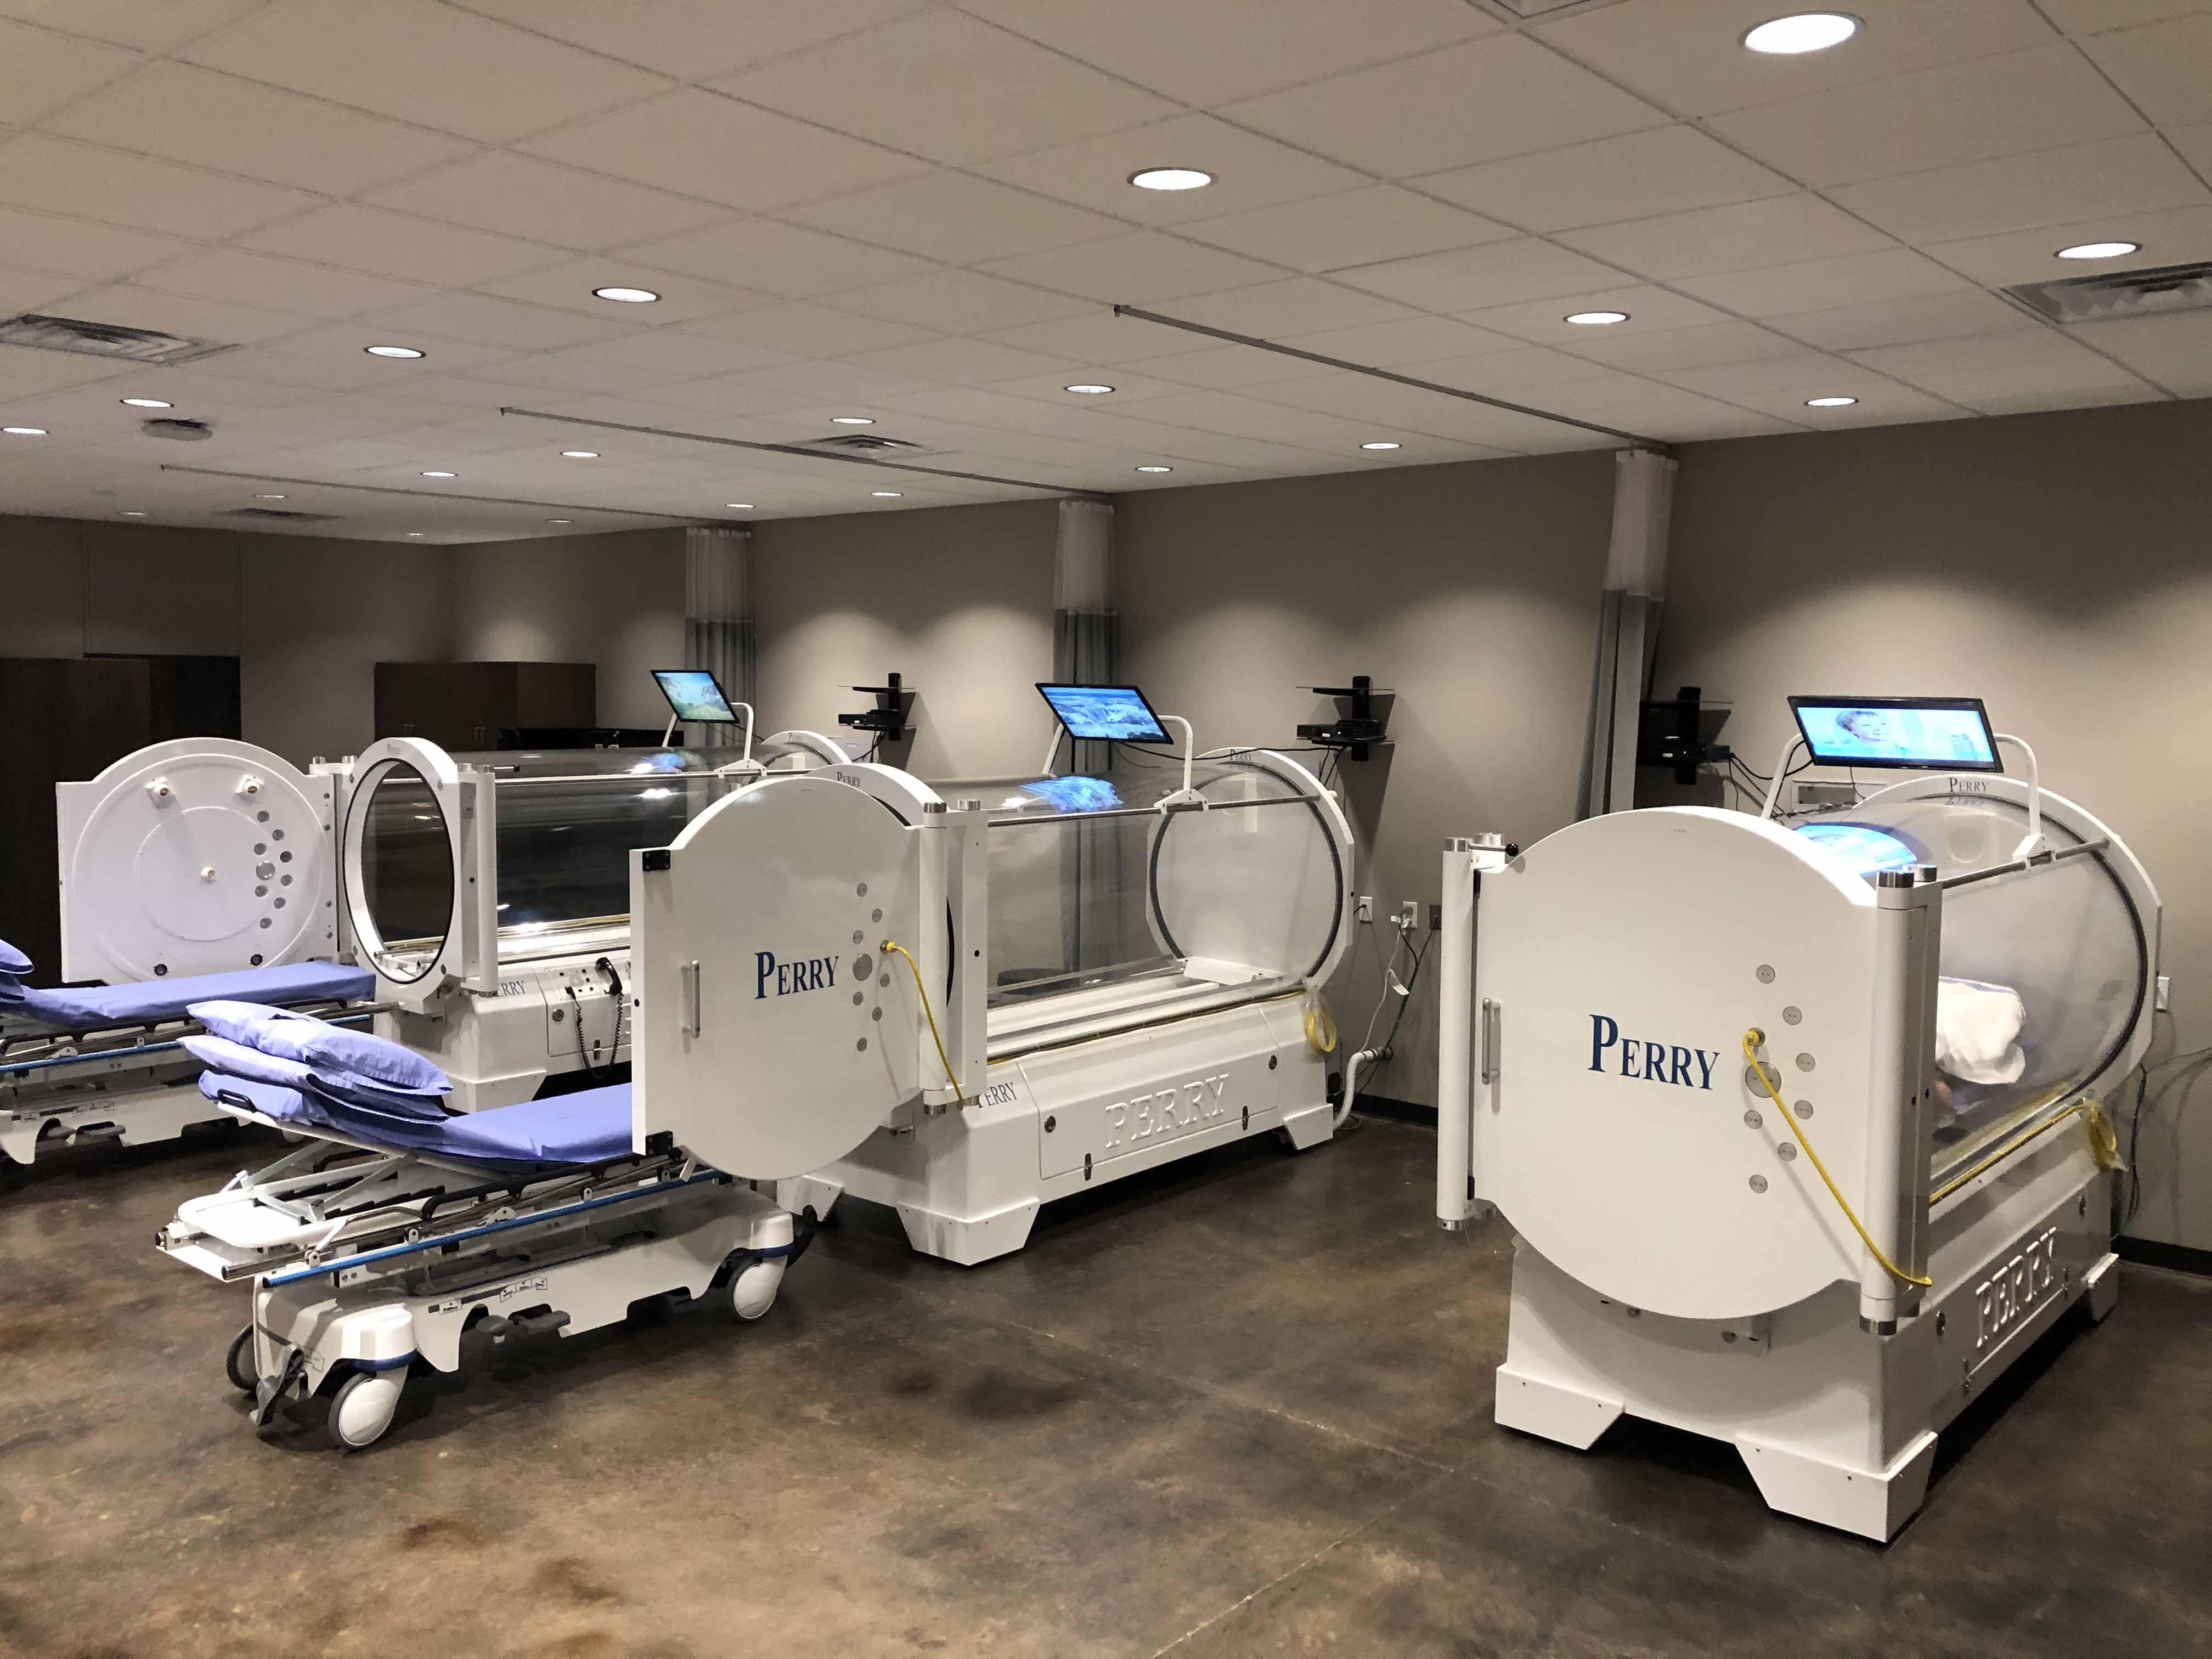 R3 Wound Care and Hyperbarics Photo